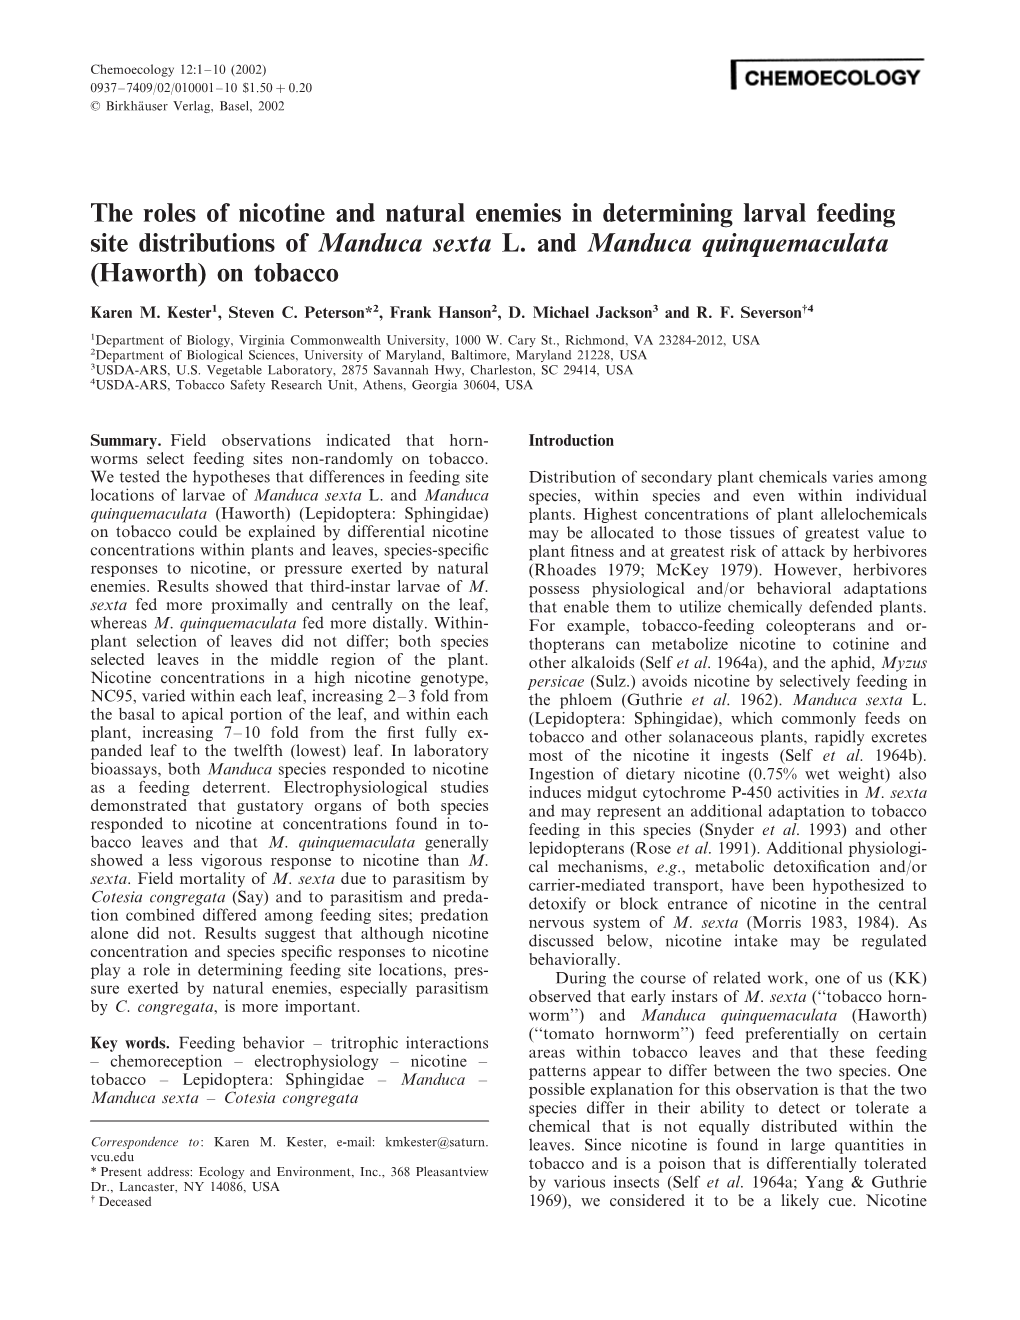 The Roles of Nicotine and Natural Enemies in Determining Larval Feeding Site Distributions of Manduca Sexta L